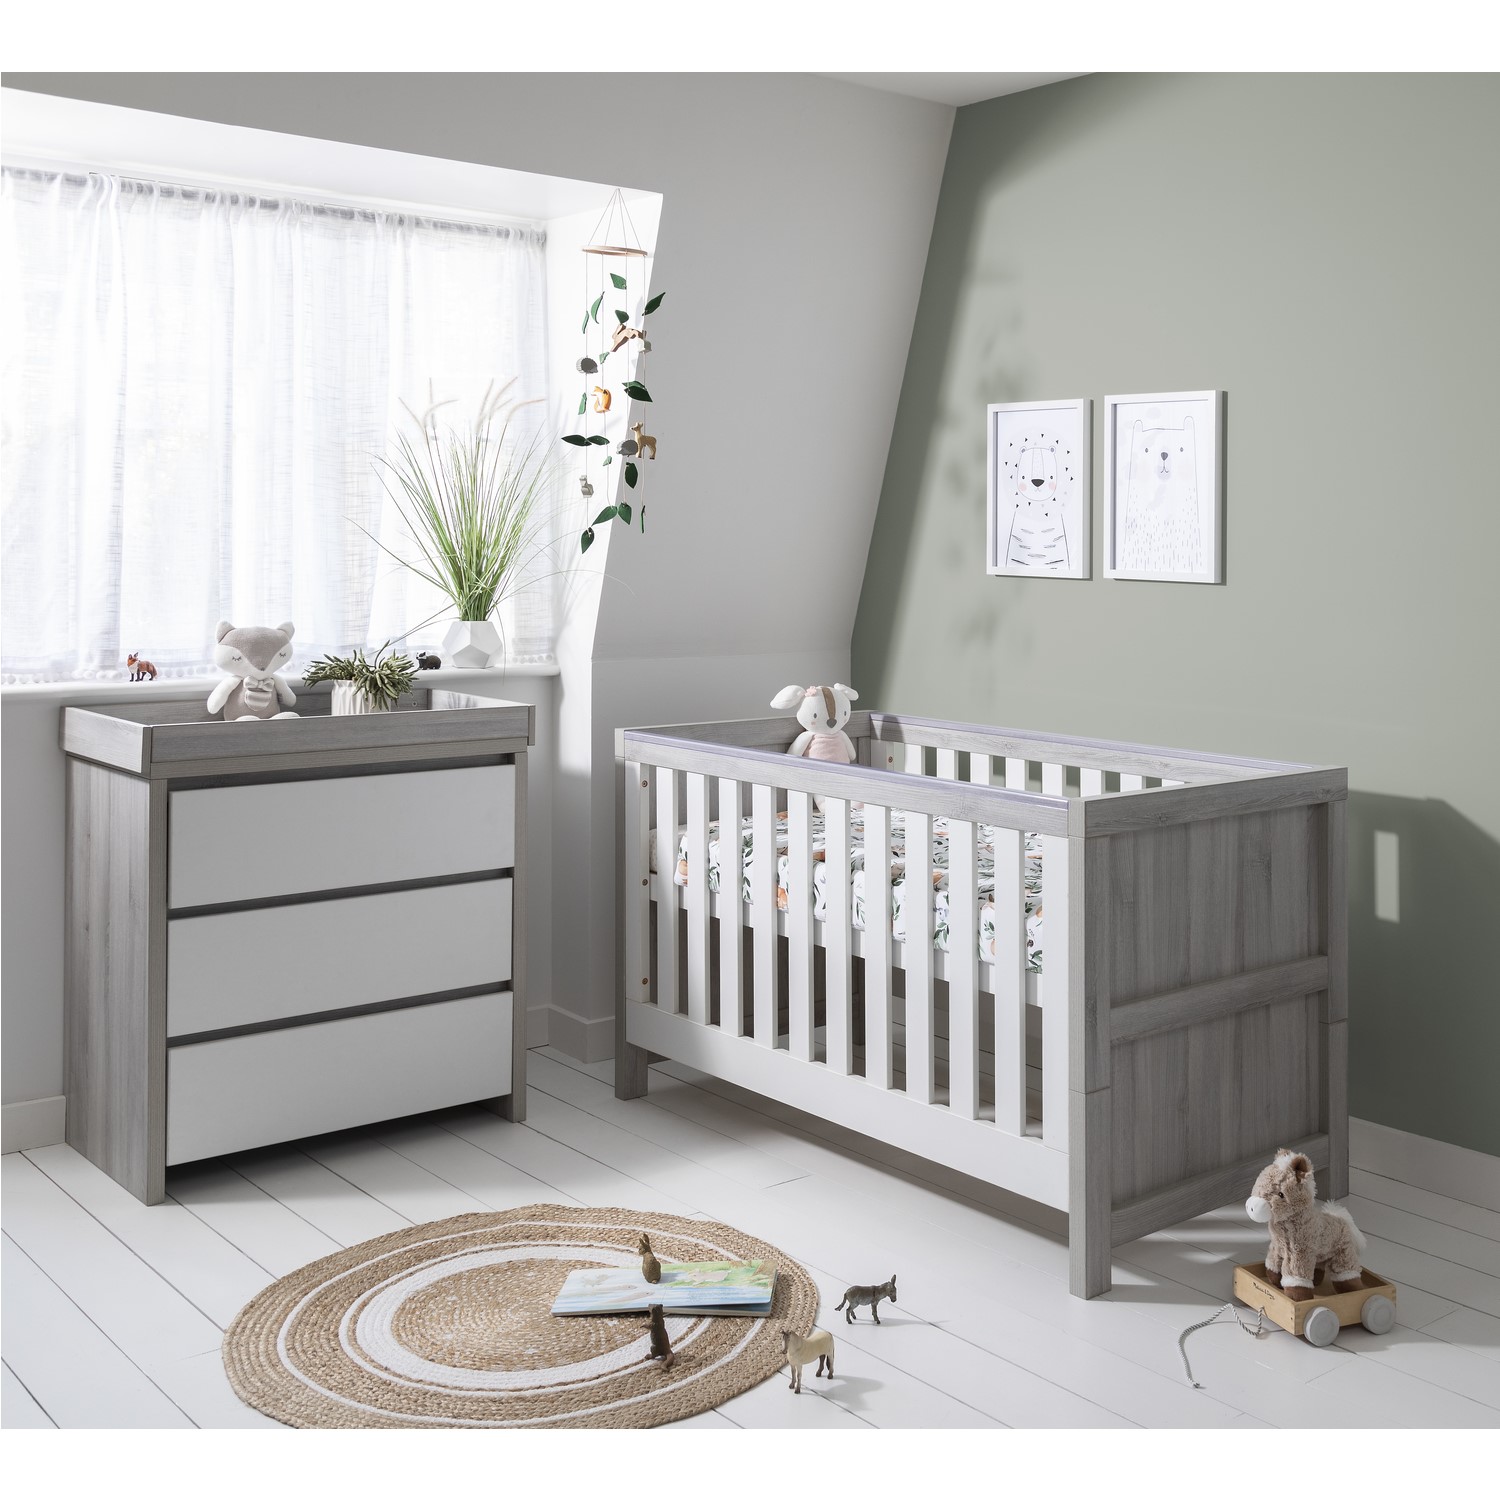 Photo of 2 piece nursery furniture set with cot bed and changing table in white and grey - modena - tutti bambini